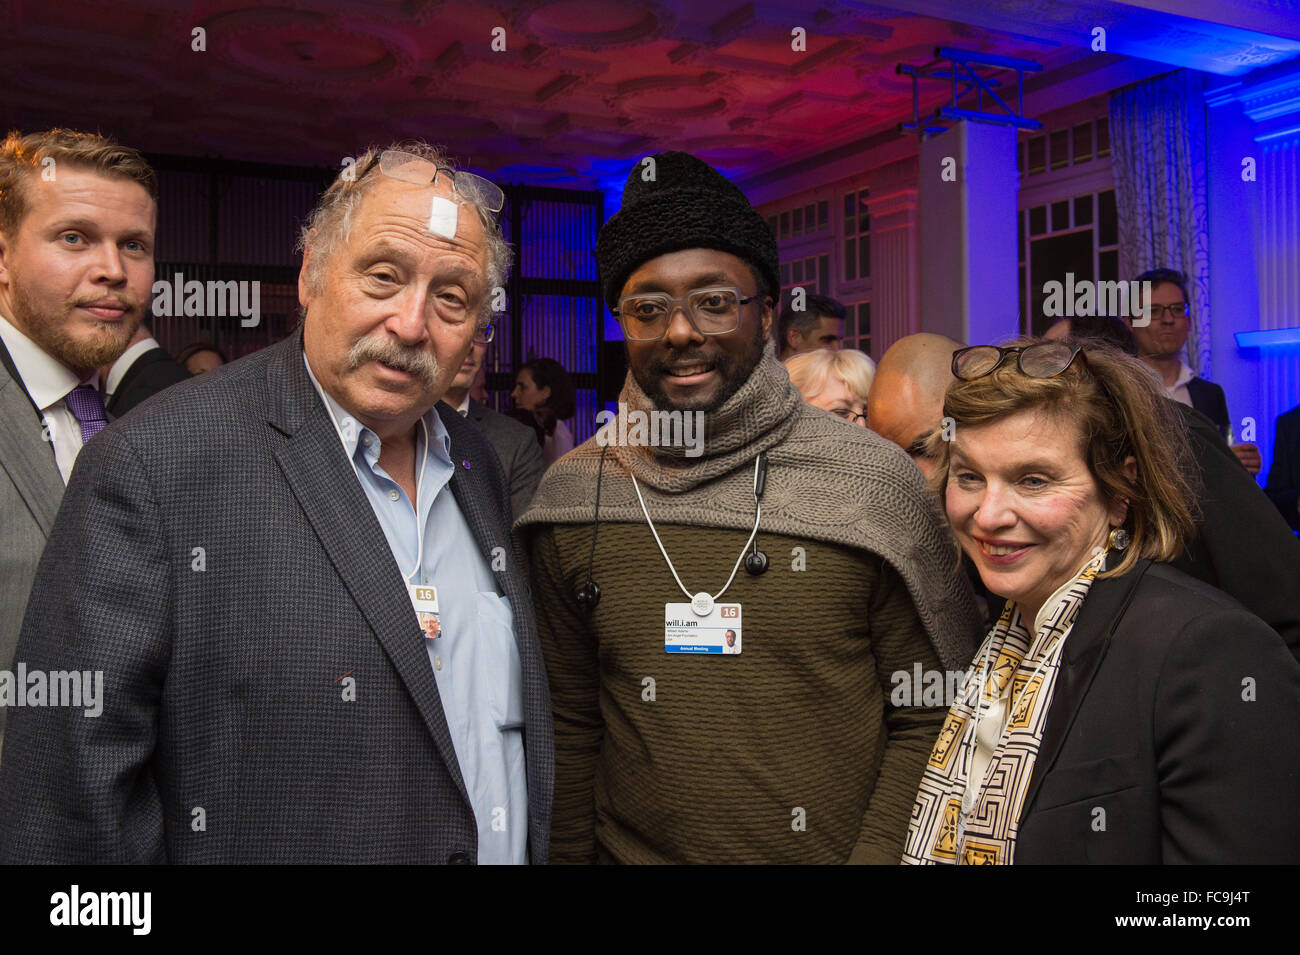 Davos, Switzerland. 20th January, 2016. (l-r) Yossi Vardi, William Adams (I.Am Angel Foundation, Founder), Stephanie Czerny (DLD Media, Managing Director) DLD Burda Event at the Steigenberger Hotel in Davos during the World Economic Forum (WEF) 2016 . January 20, 2016 Credit:  dpa picture alliance/Alamy Live News Stock Photo